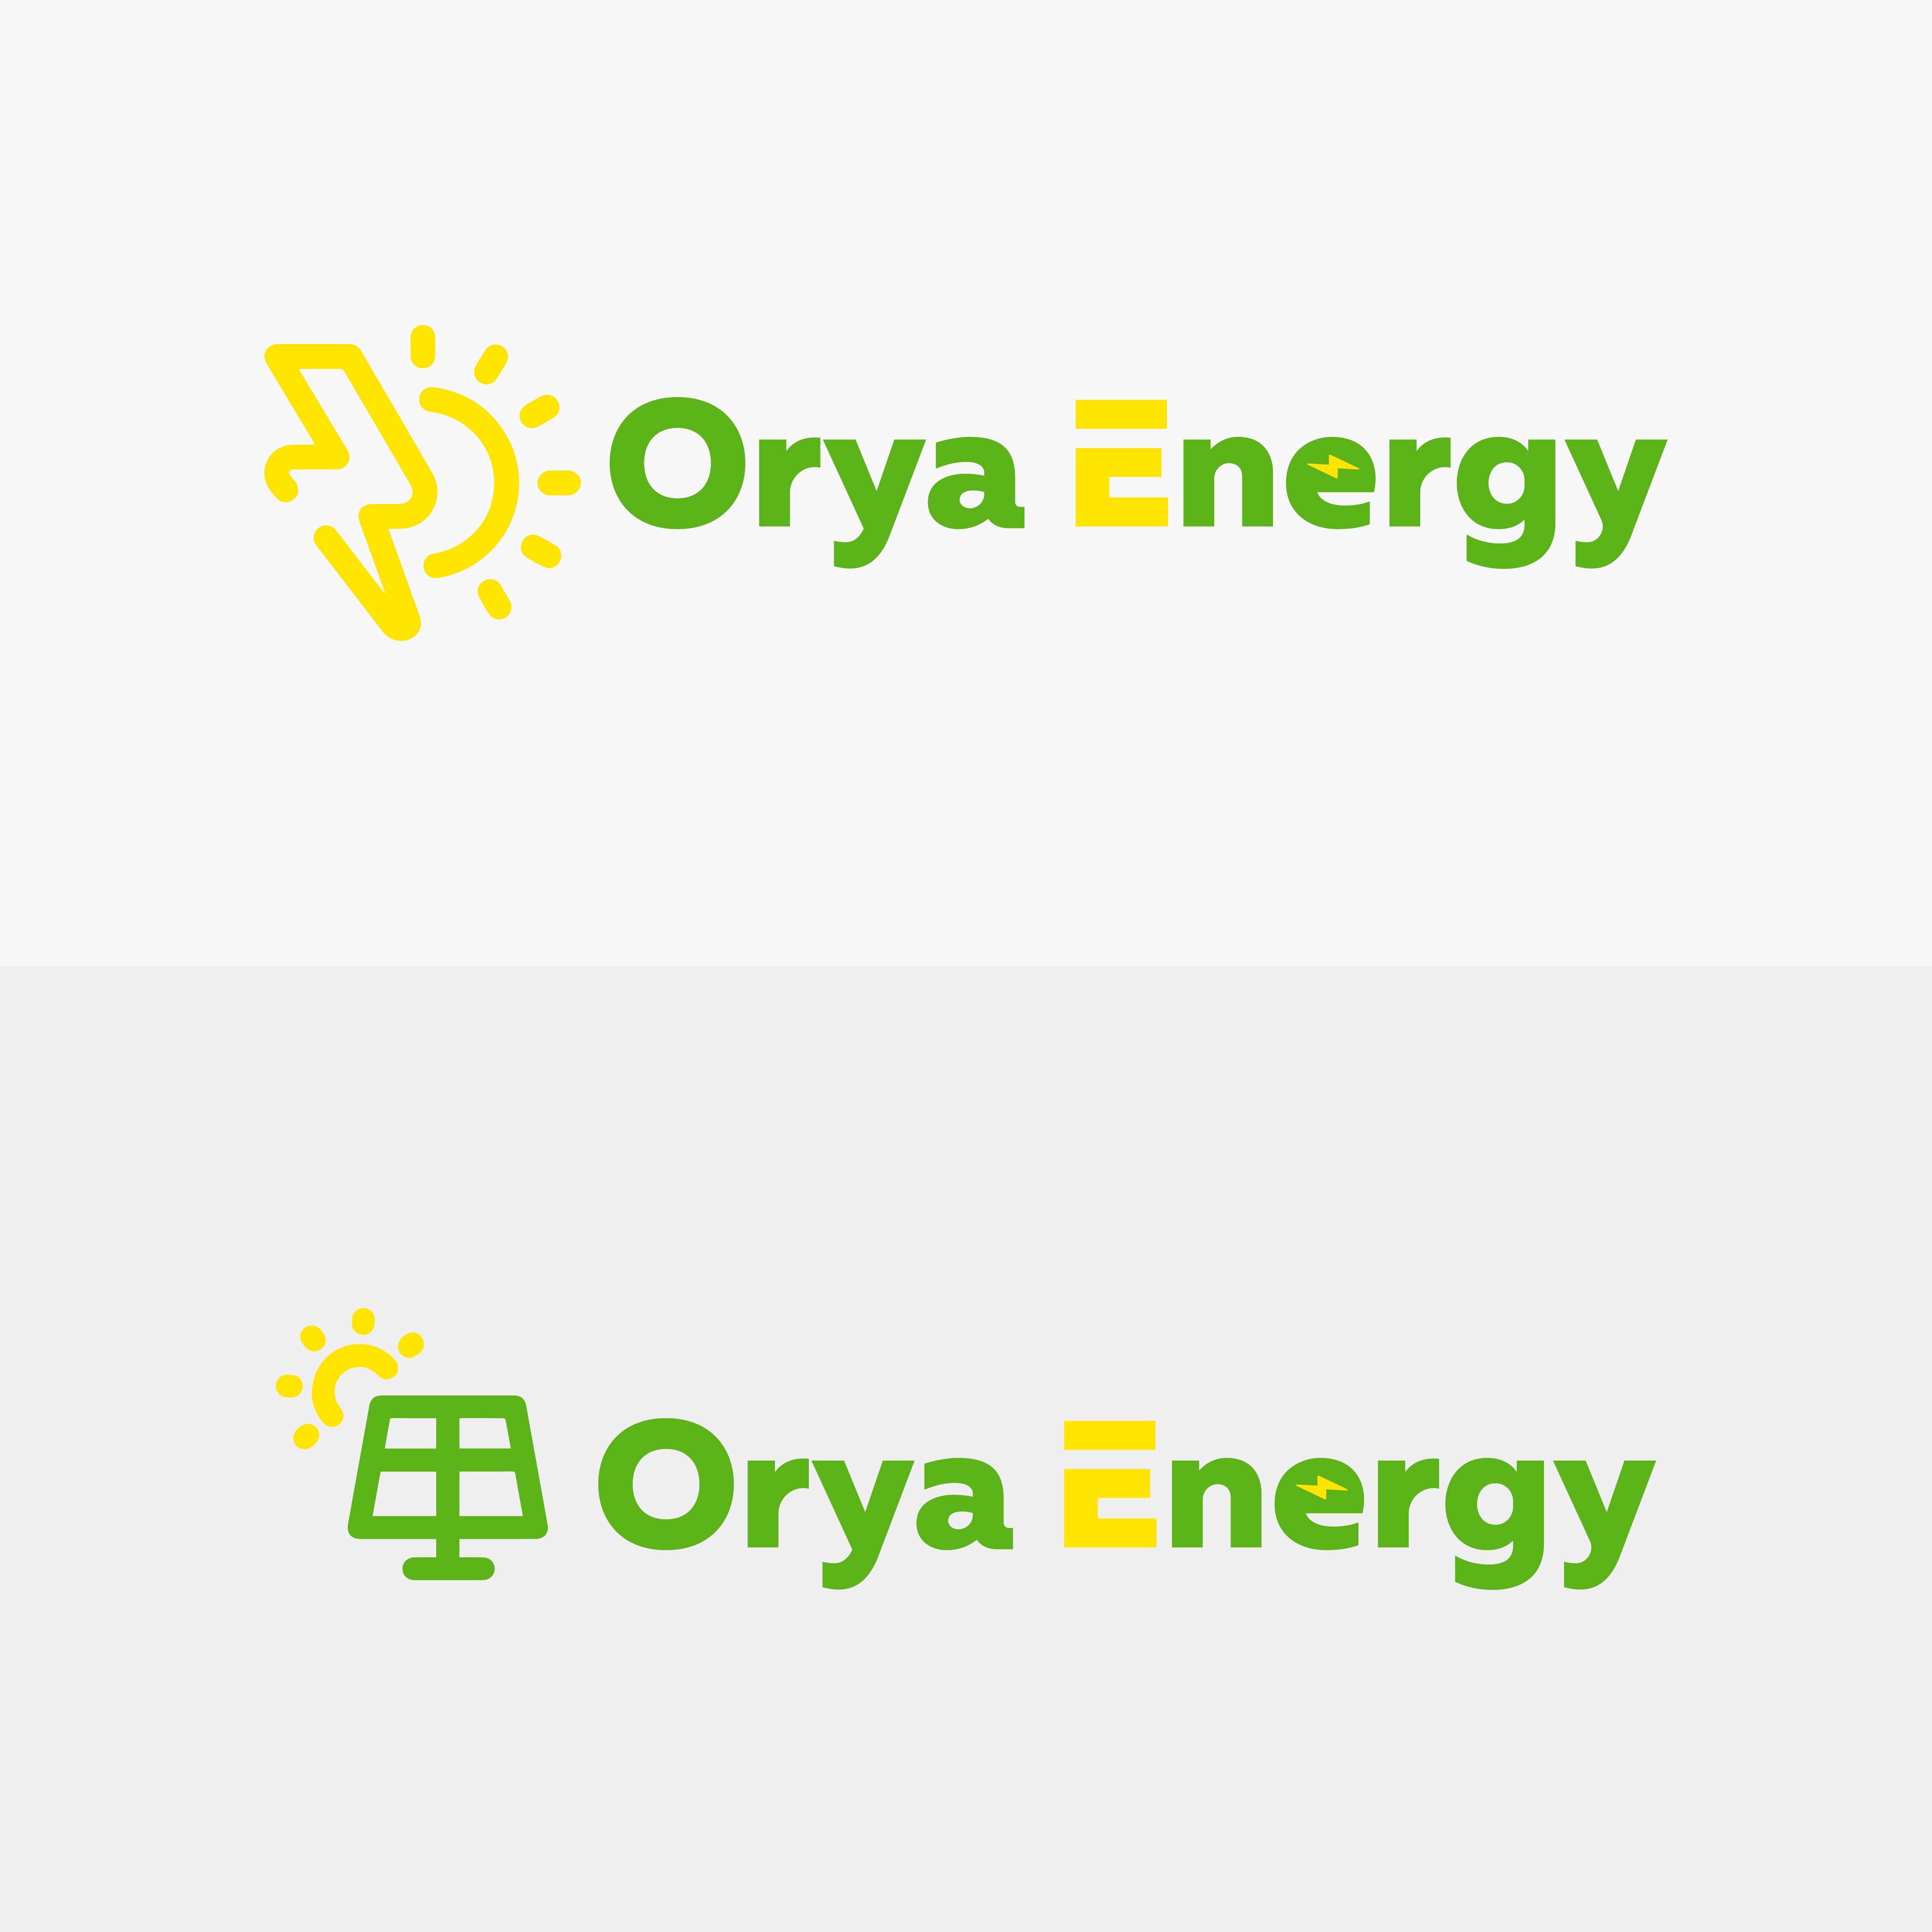 Solar energy logo designs in vector format, featuring sun power elements cover image.